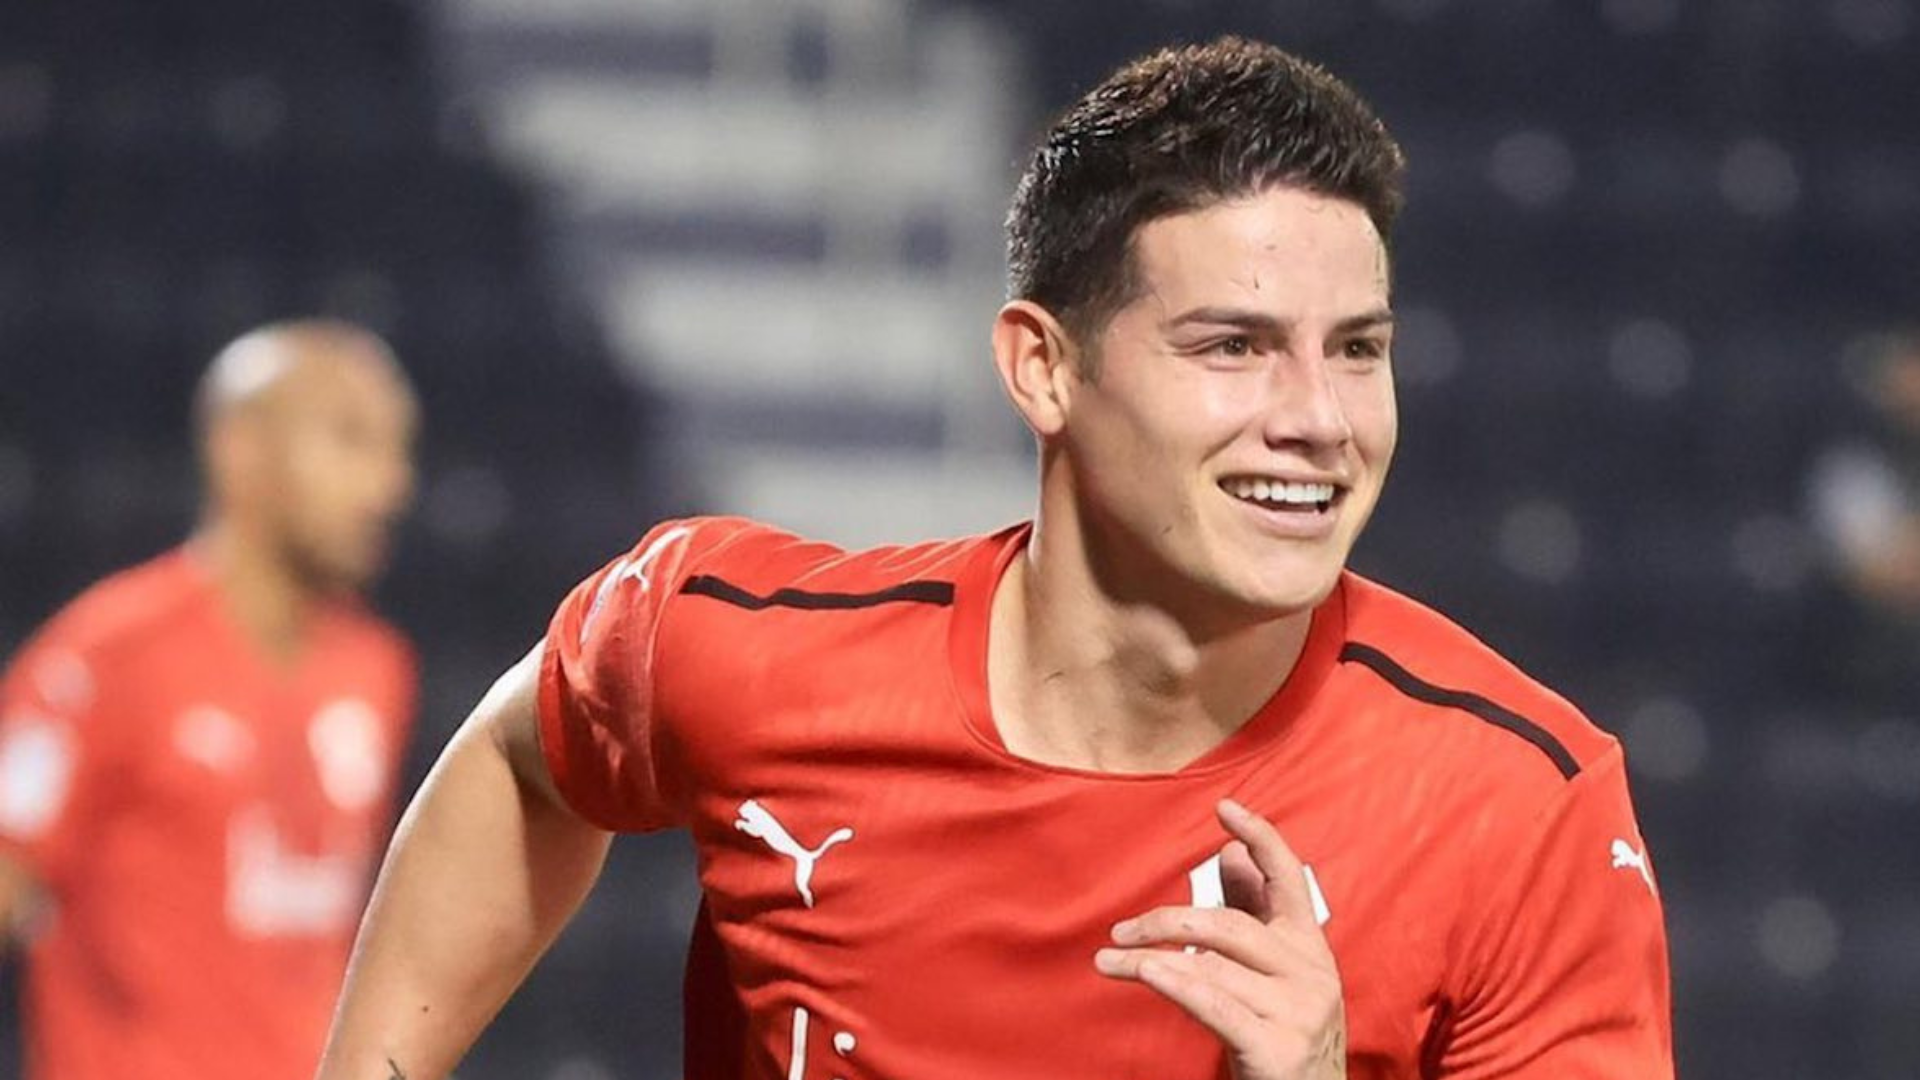 James Rodríguez wearing red uniform and smiling while running